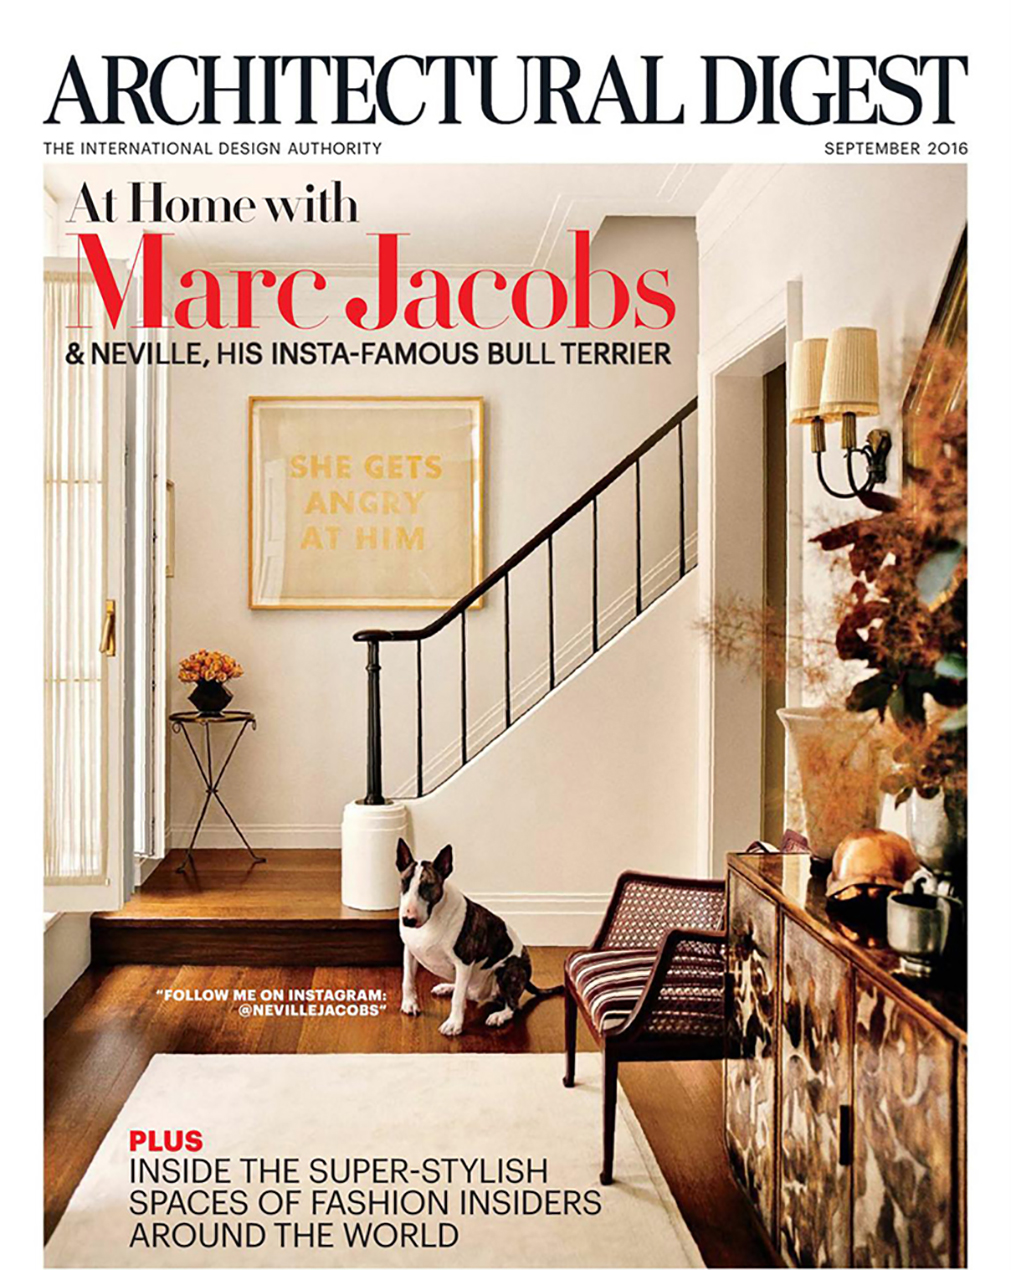 Architectural Digest cover story featuring Marc Jacobs New York City townhouse with H. Theophile hardware.